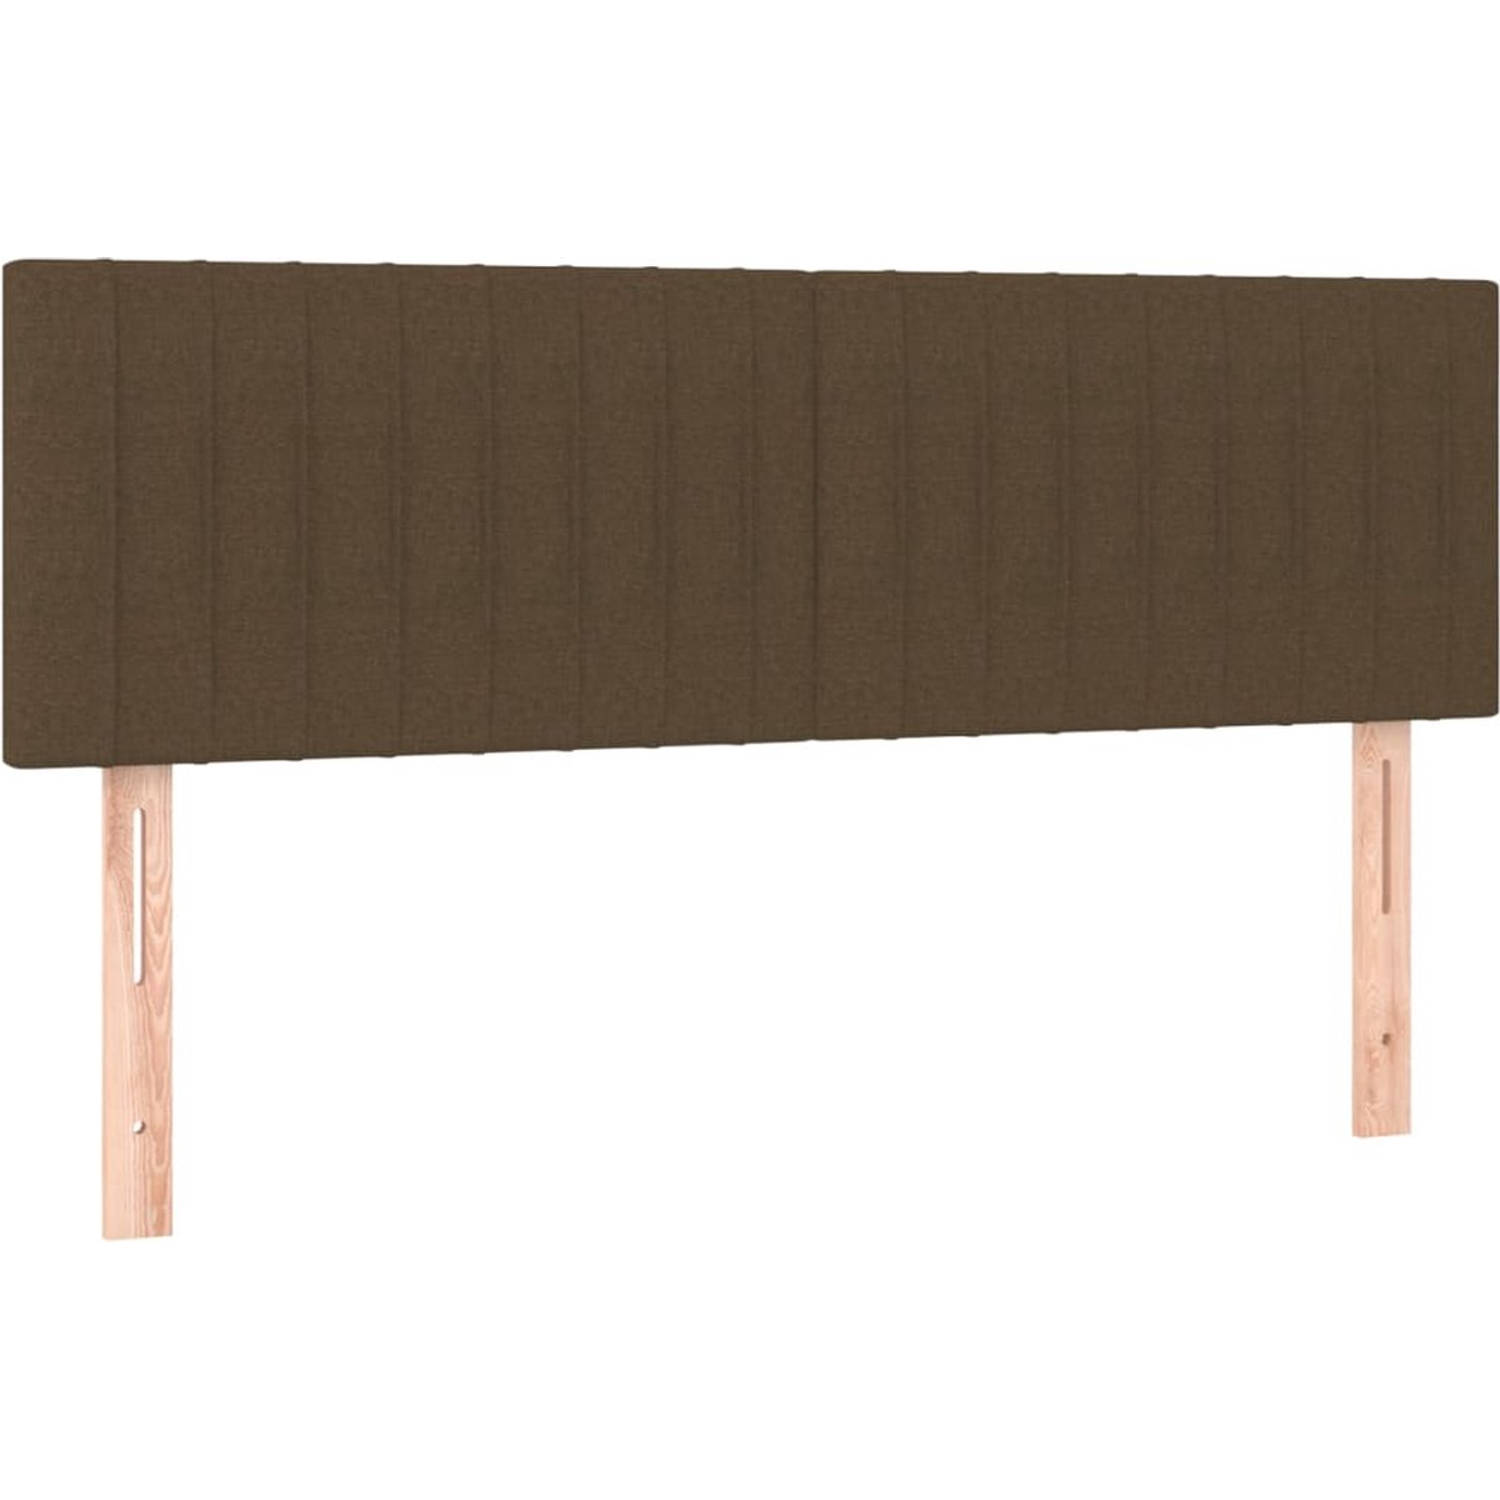 The Living Store Boxspringbed - Donkerbruin - 203 x 144 x 78/88 cm - Pocketvering